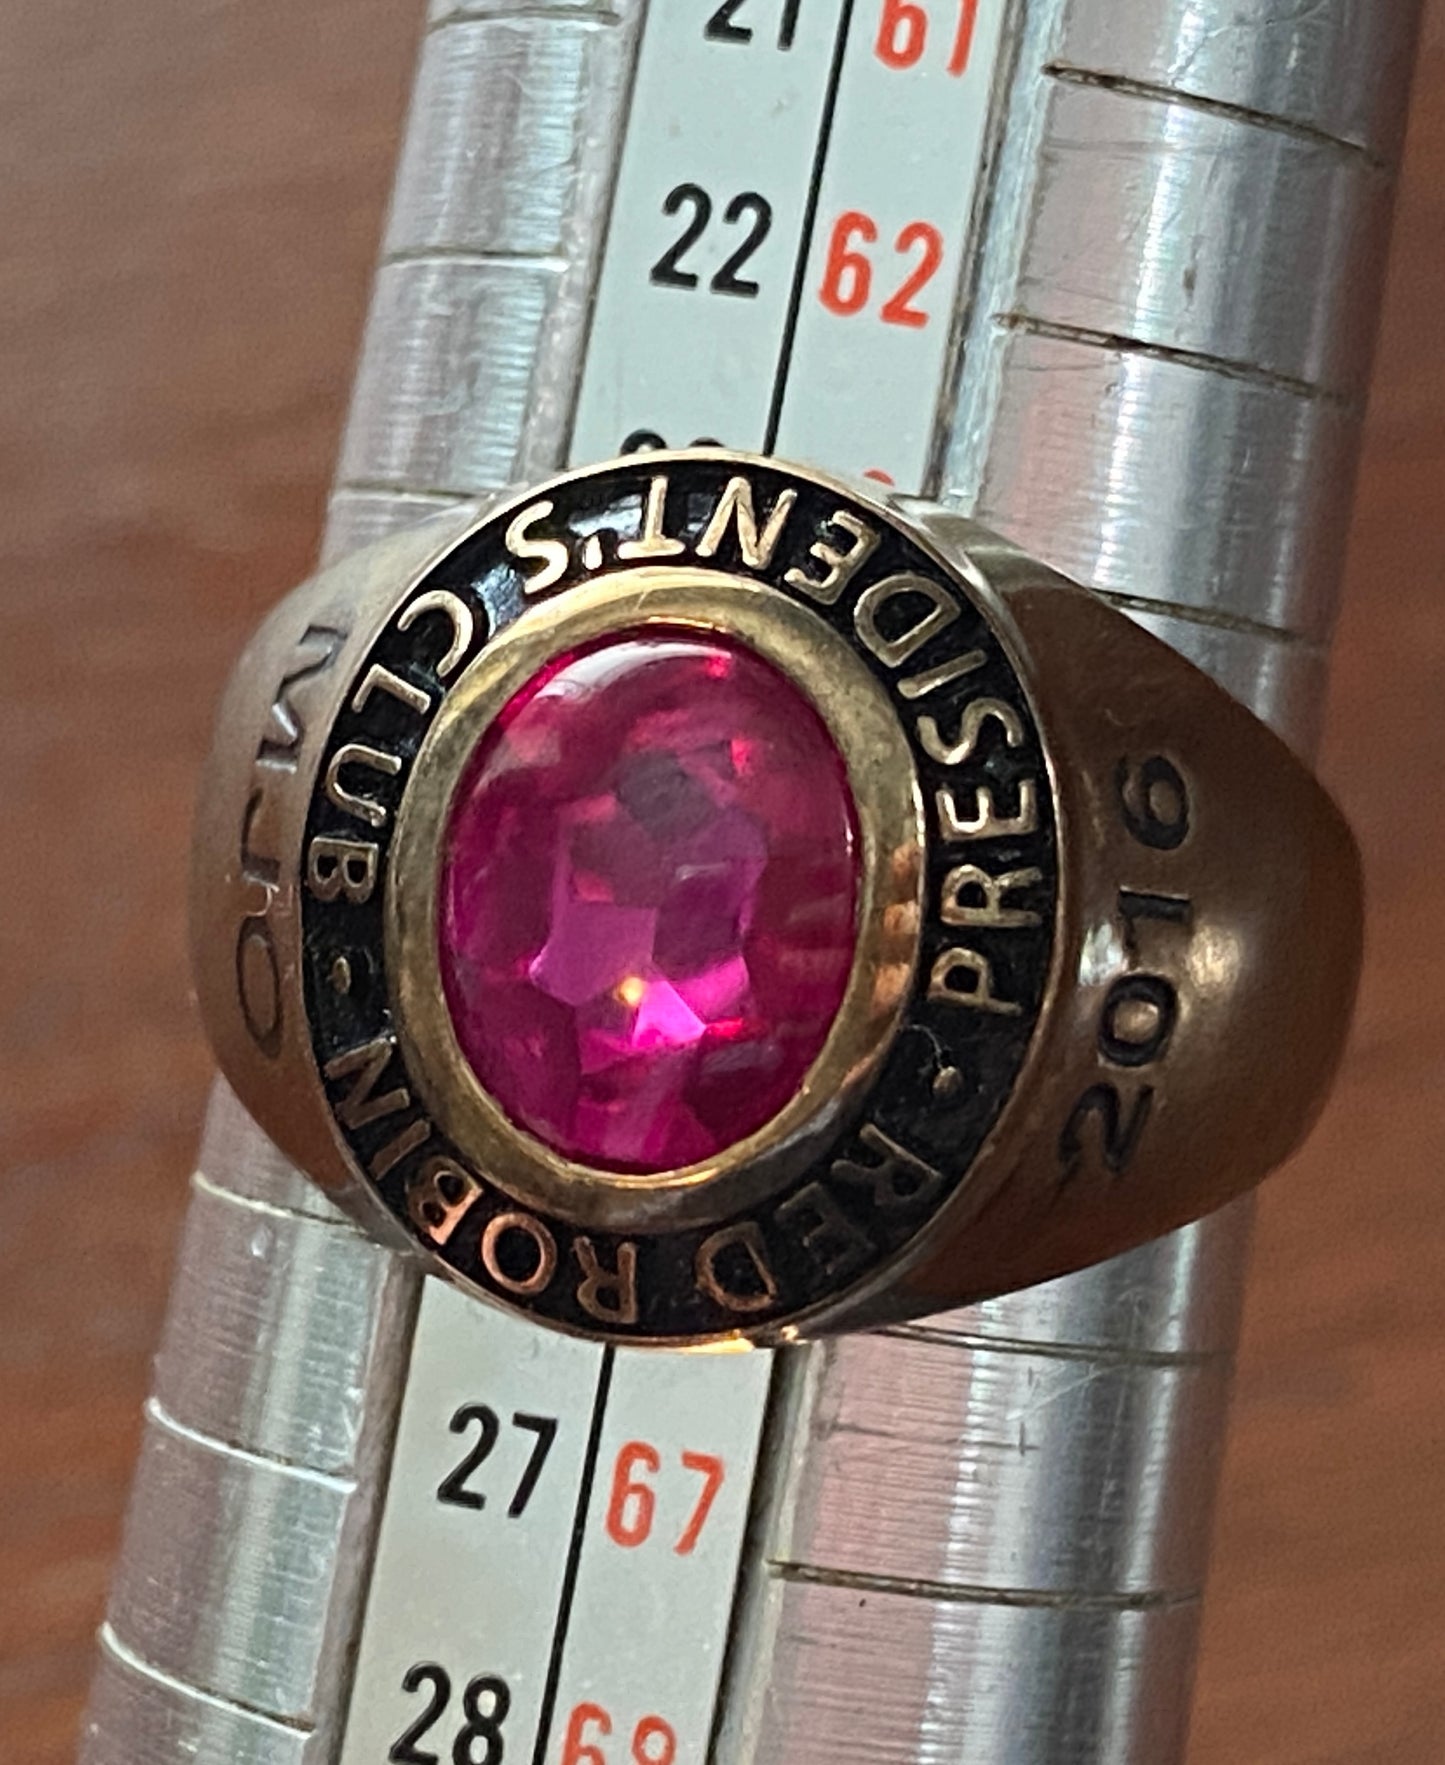 Gold Plate Red Robin Presidents Club Ring Pink Cabochon Sz 10.75